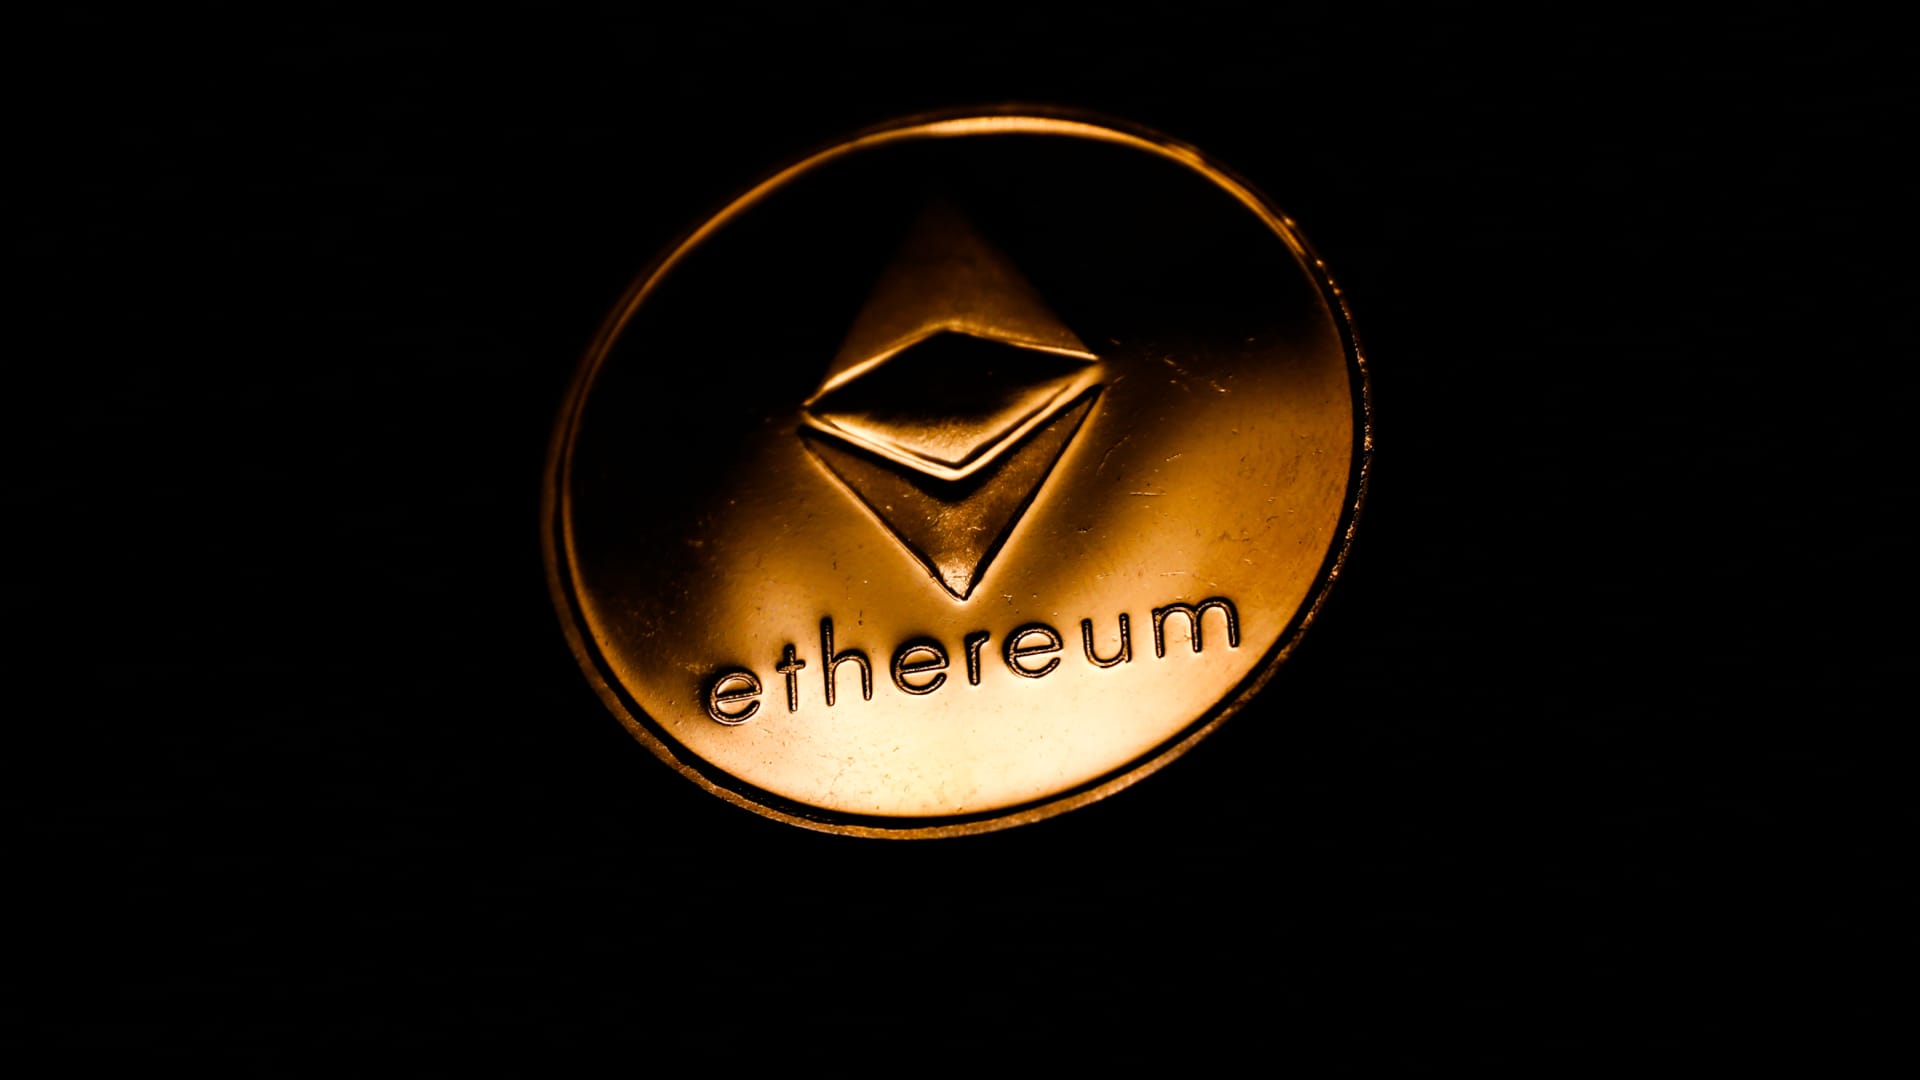 Ether (ETH) drops 15% since Ethereum merge as traders take profits